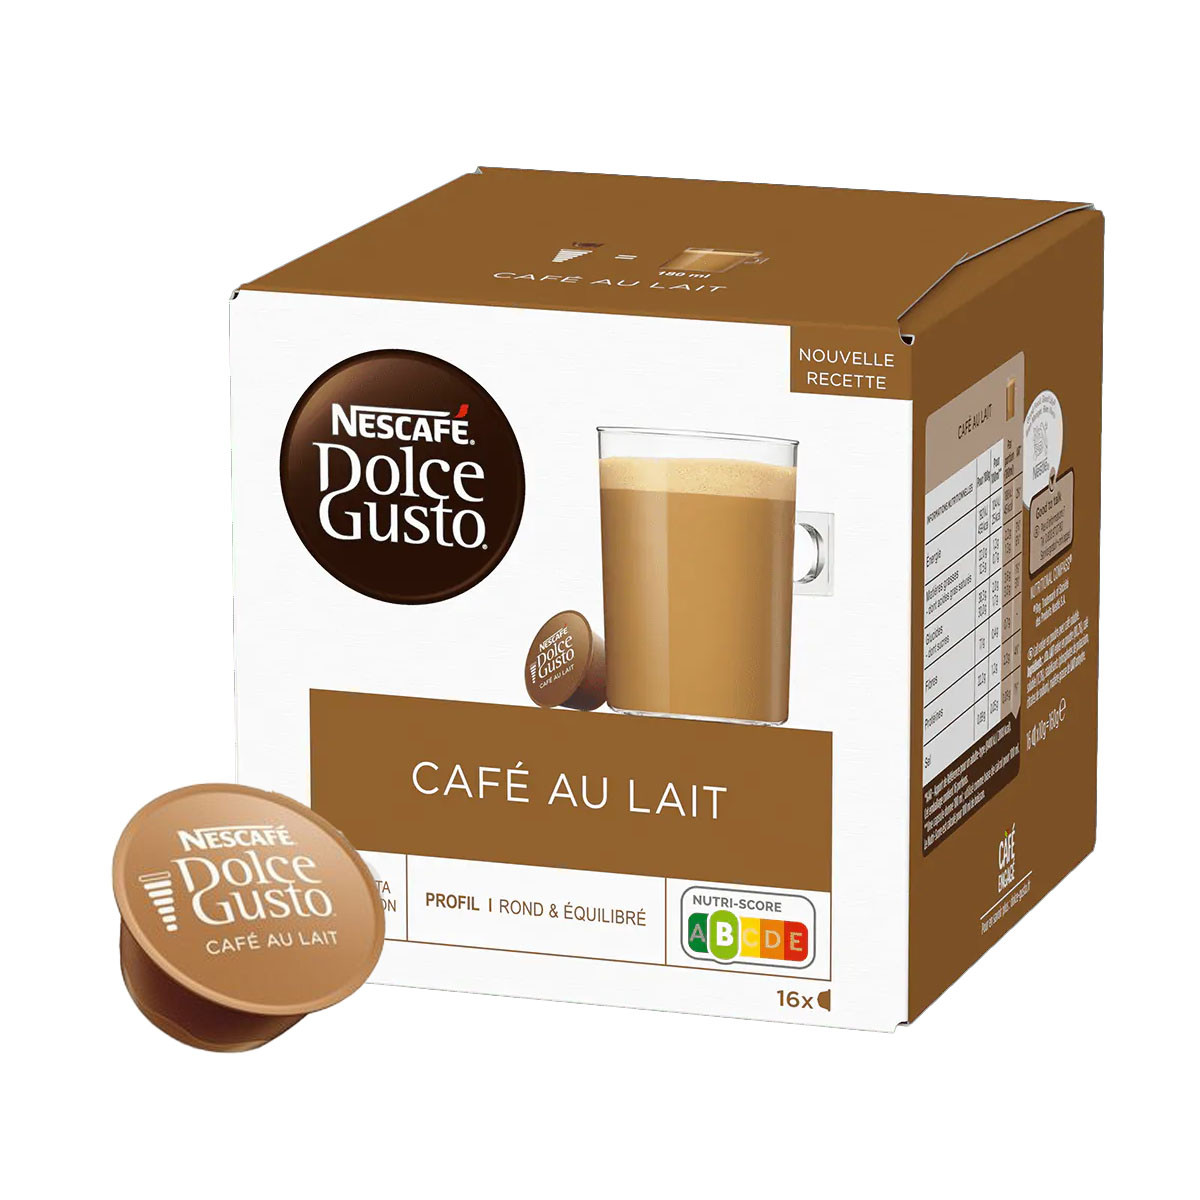 Dosette Dolce Gusto compatible pas cher - Coffee Webstore